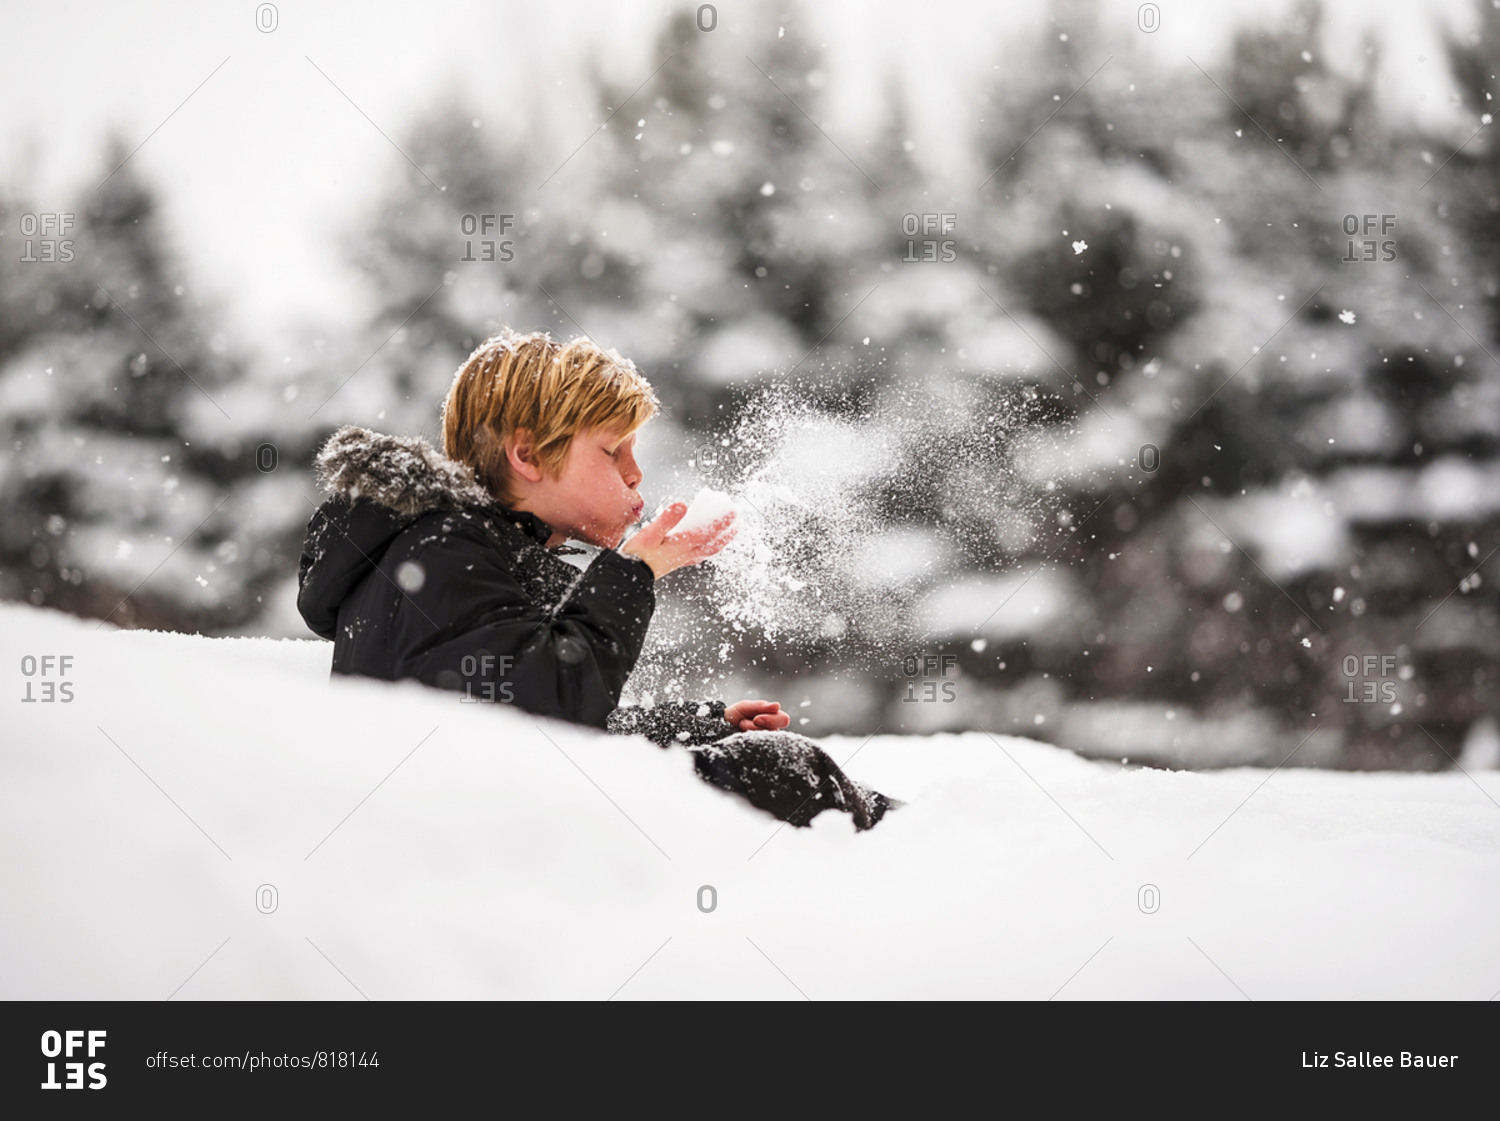 Portrait of a young boy blowing snow from his hands